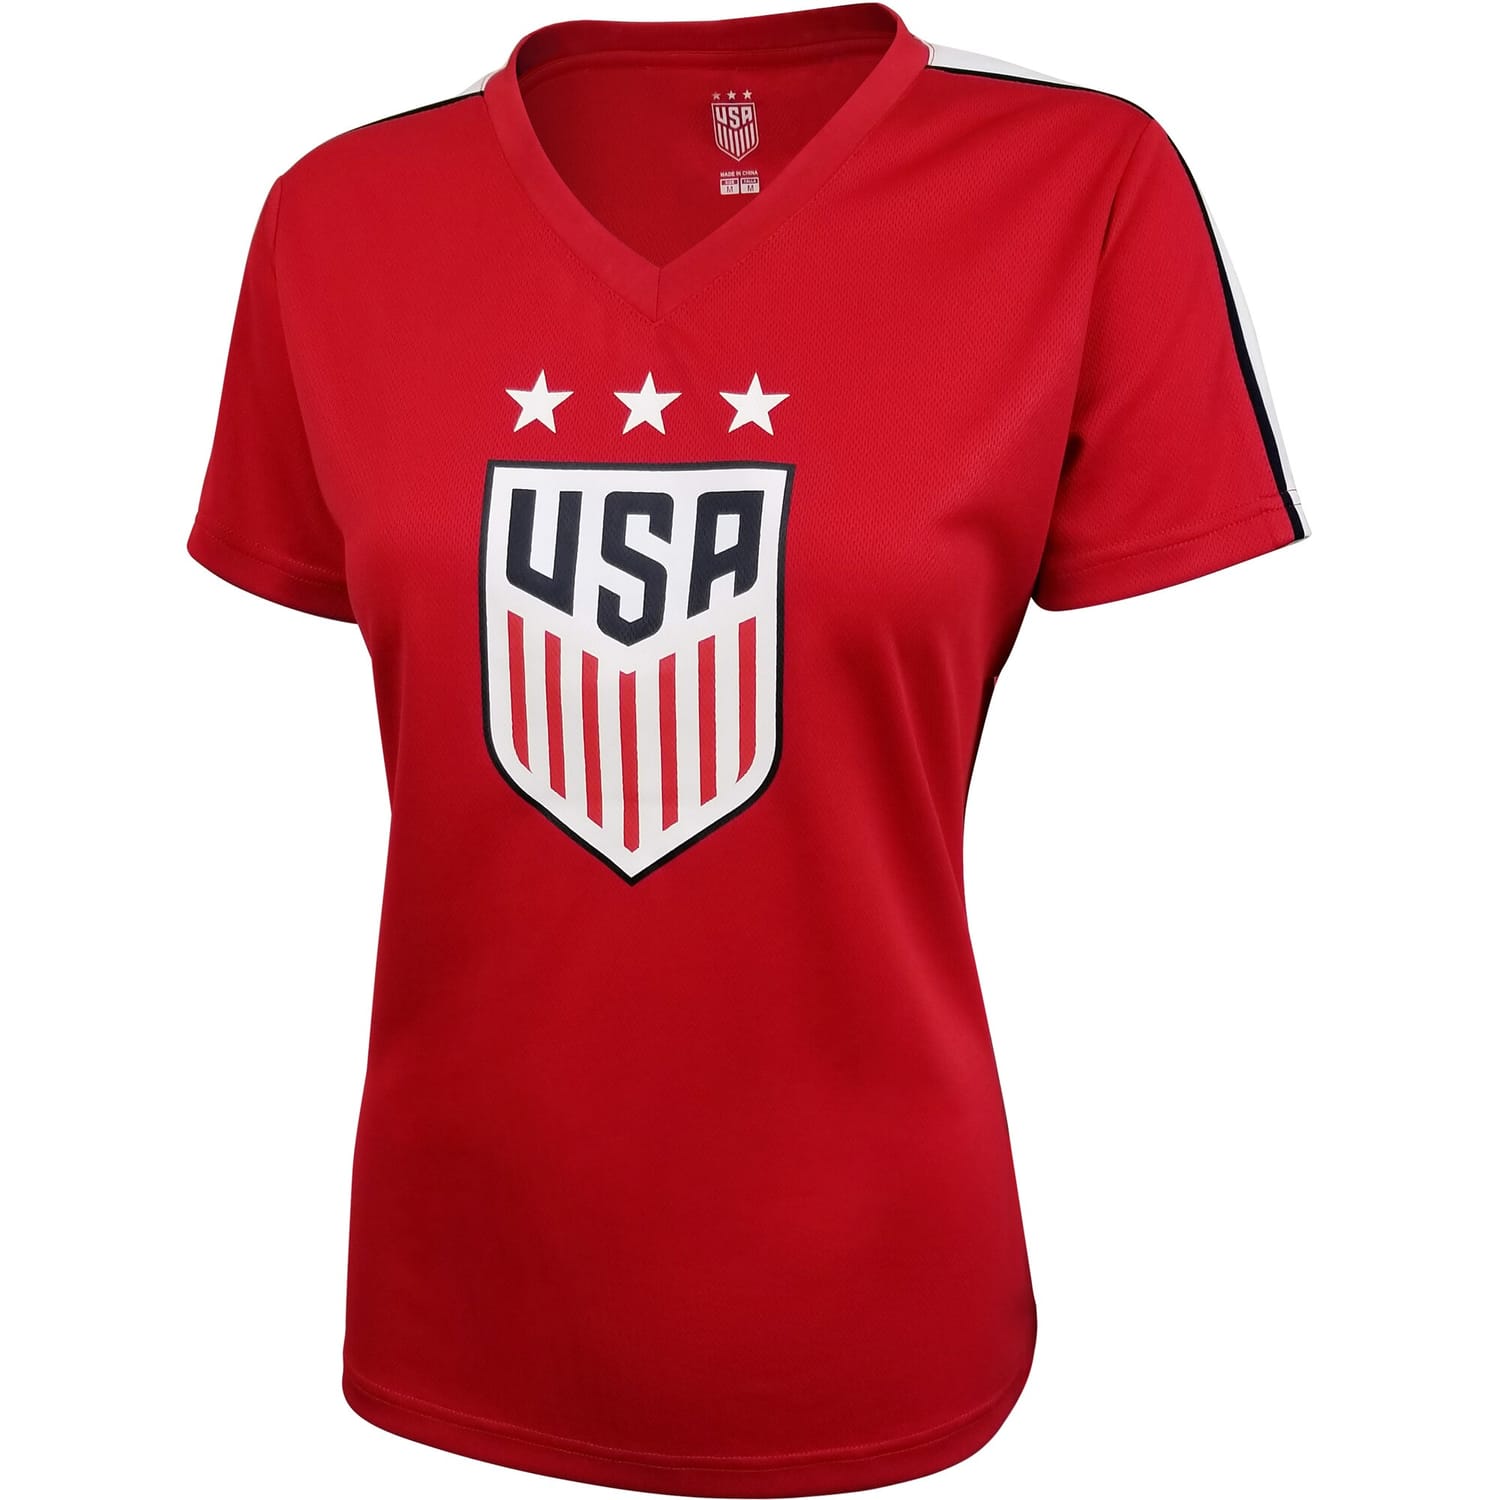 USWNT Jersey Shirt Red 1999 player Mia Hamm printing for Women